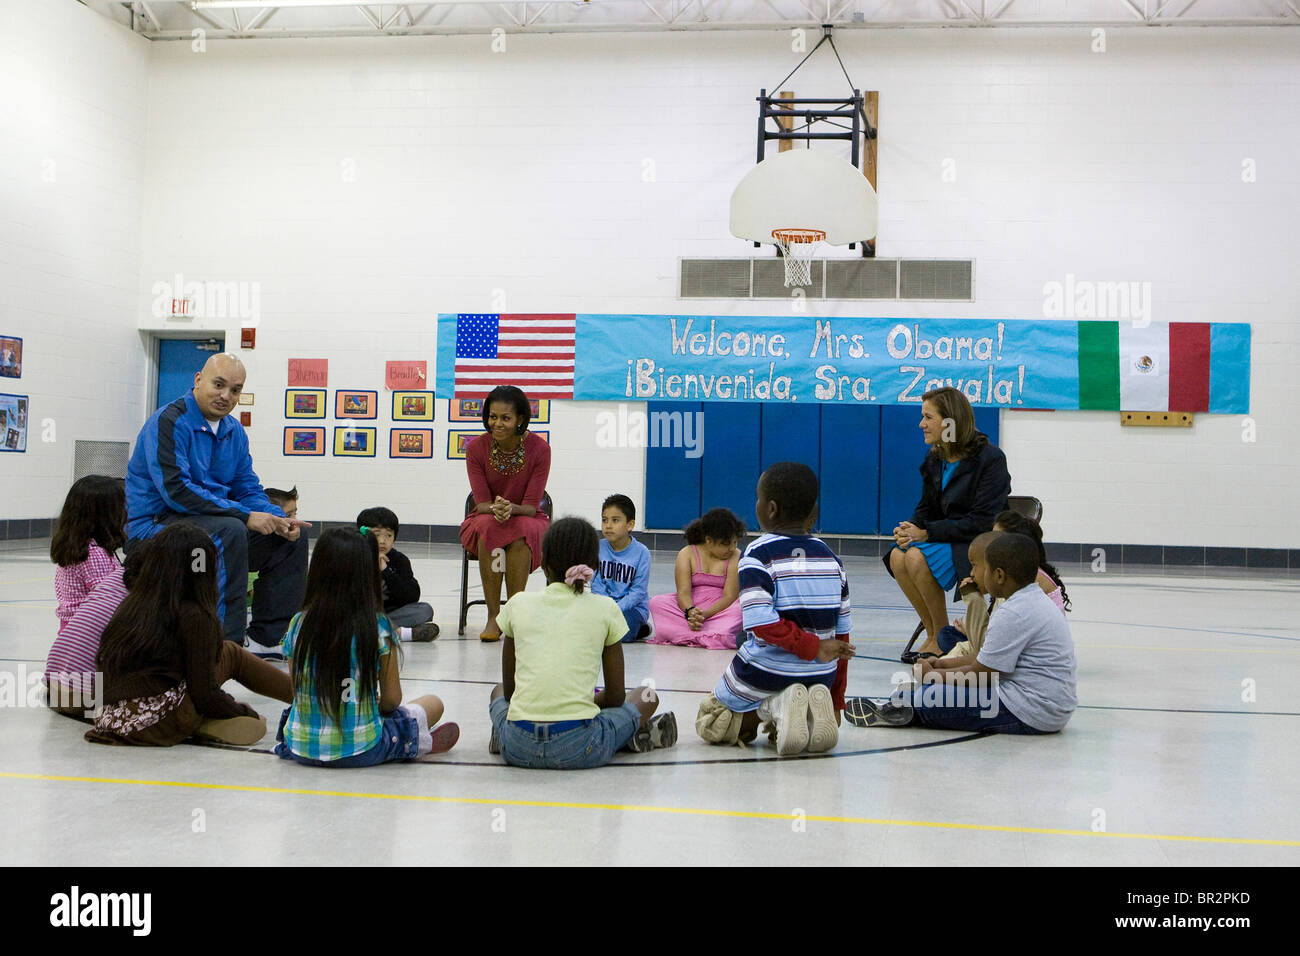 First Lady Michelle Obama besucht Estates Elementary School in New Hampshire. Stockfoto